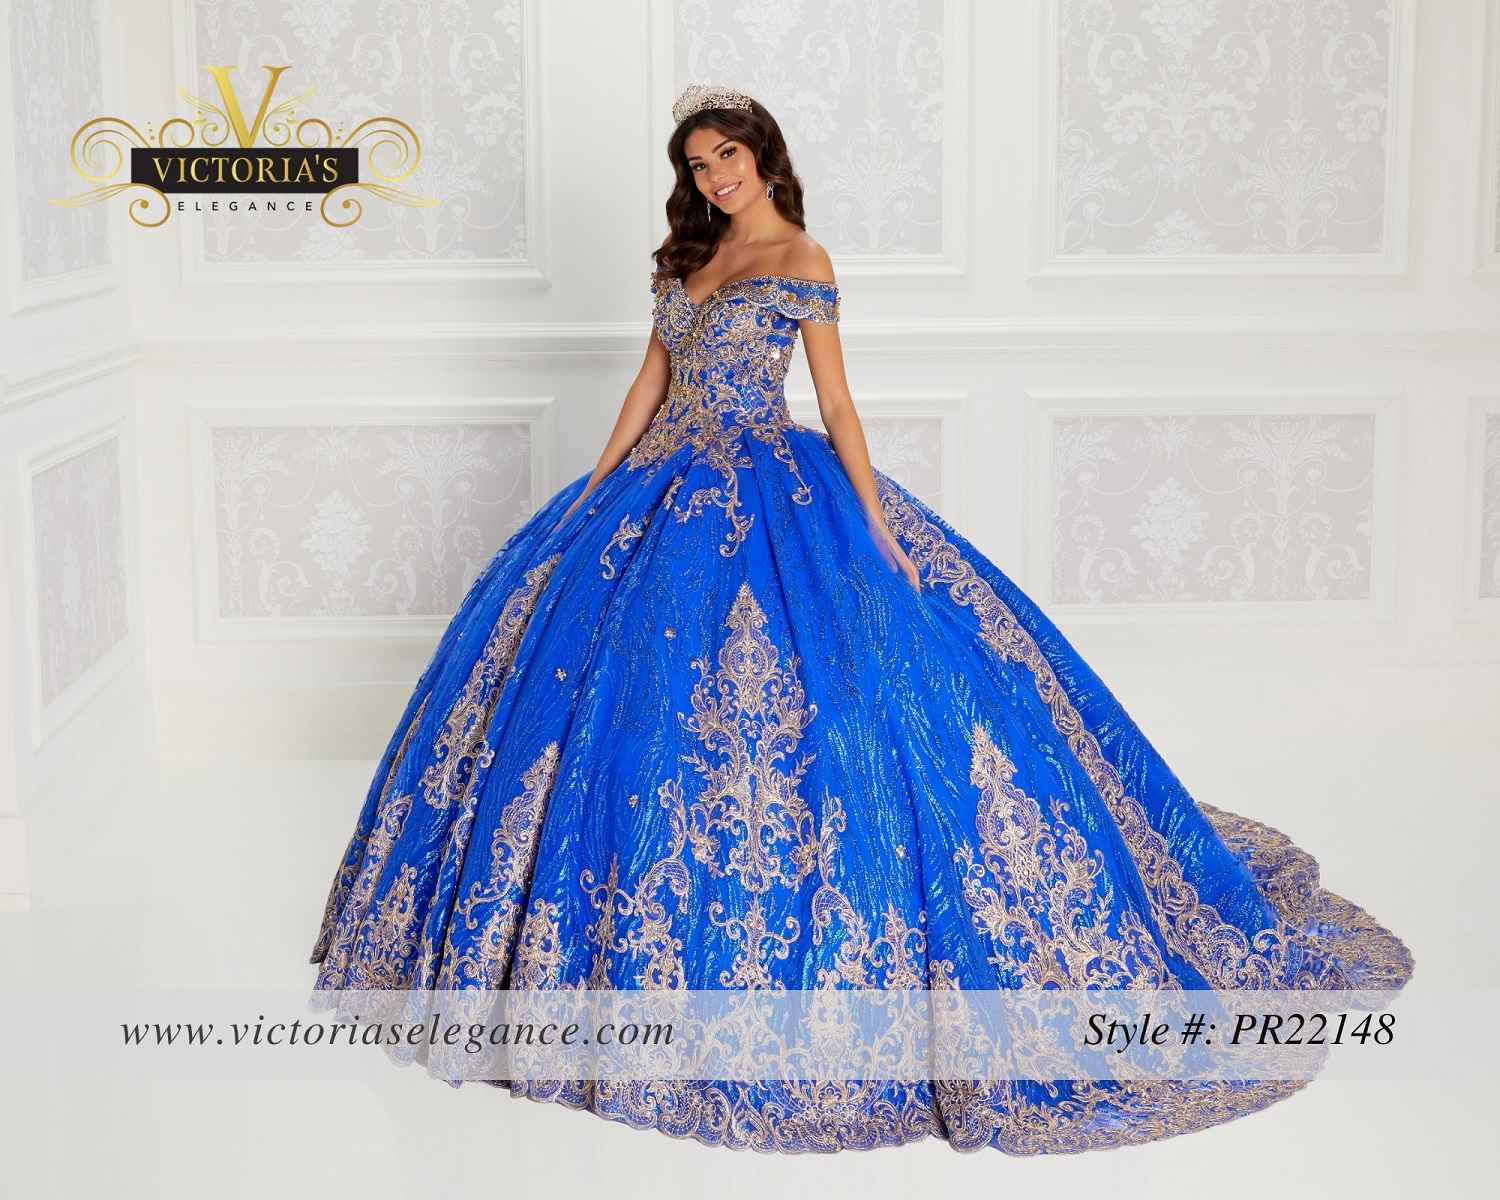 Princesa by Ariana Vara Cold Off Shoulder Embroidered Ballgown